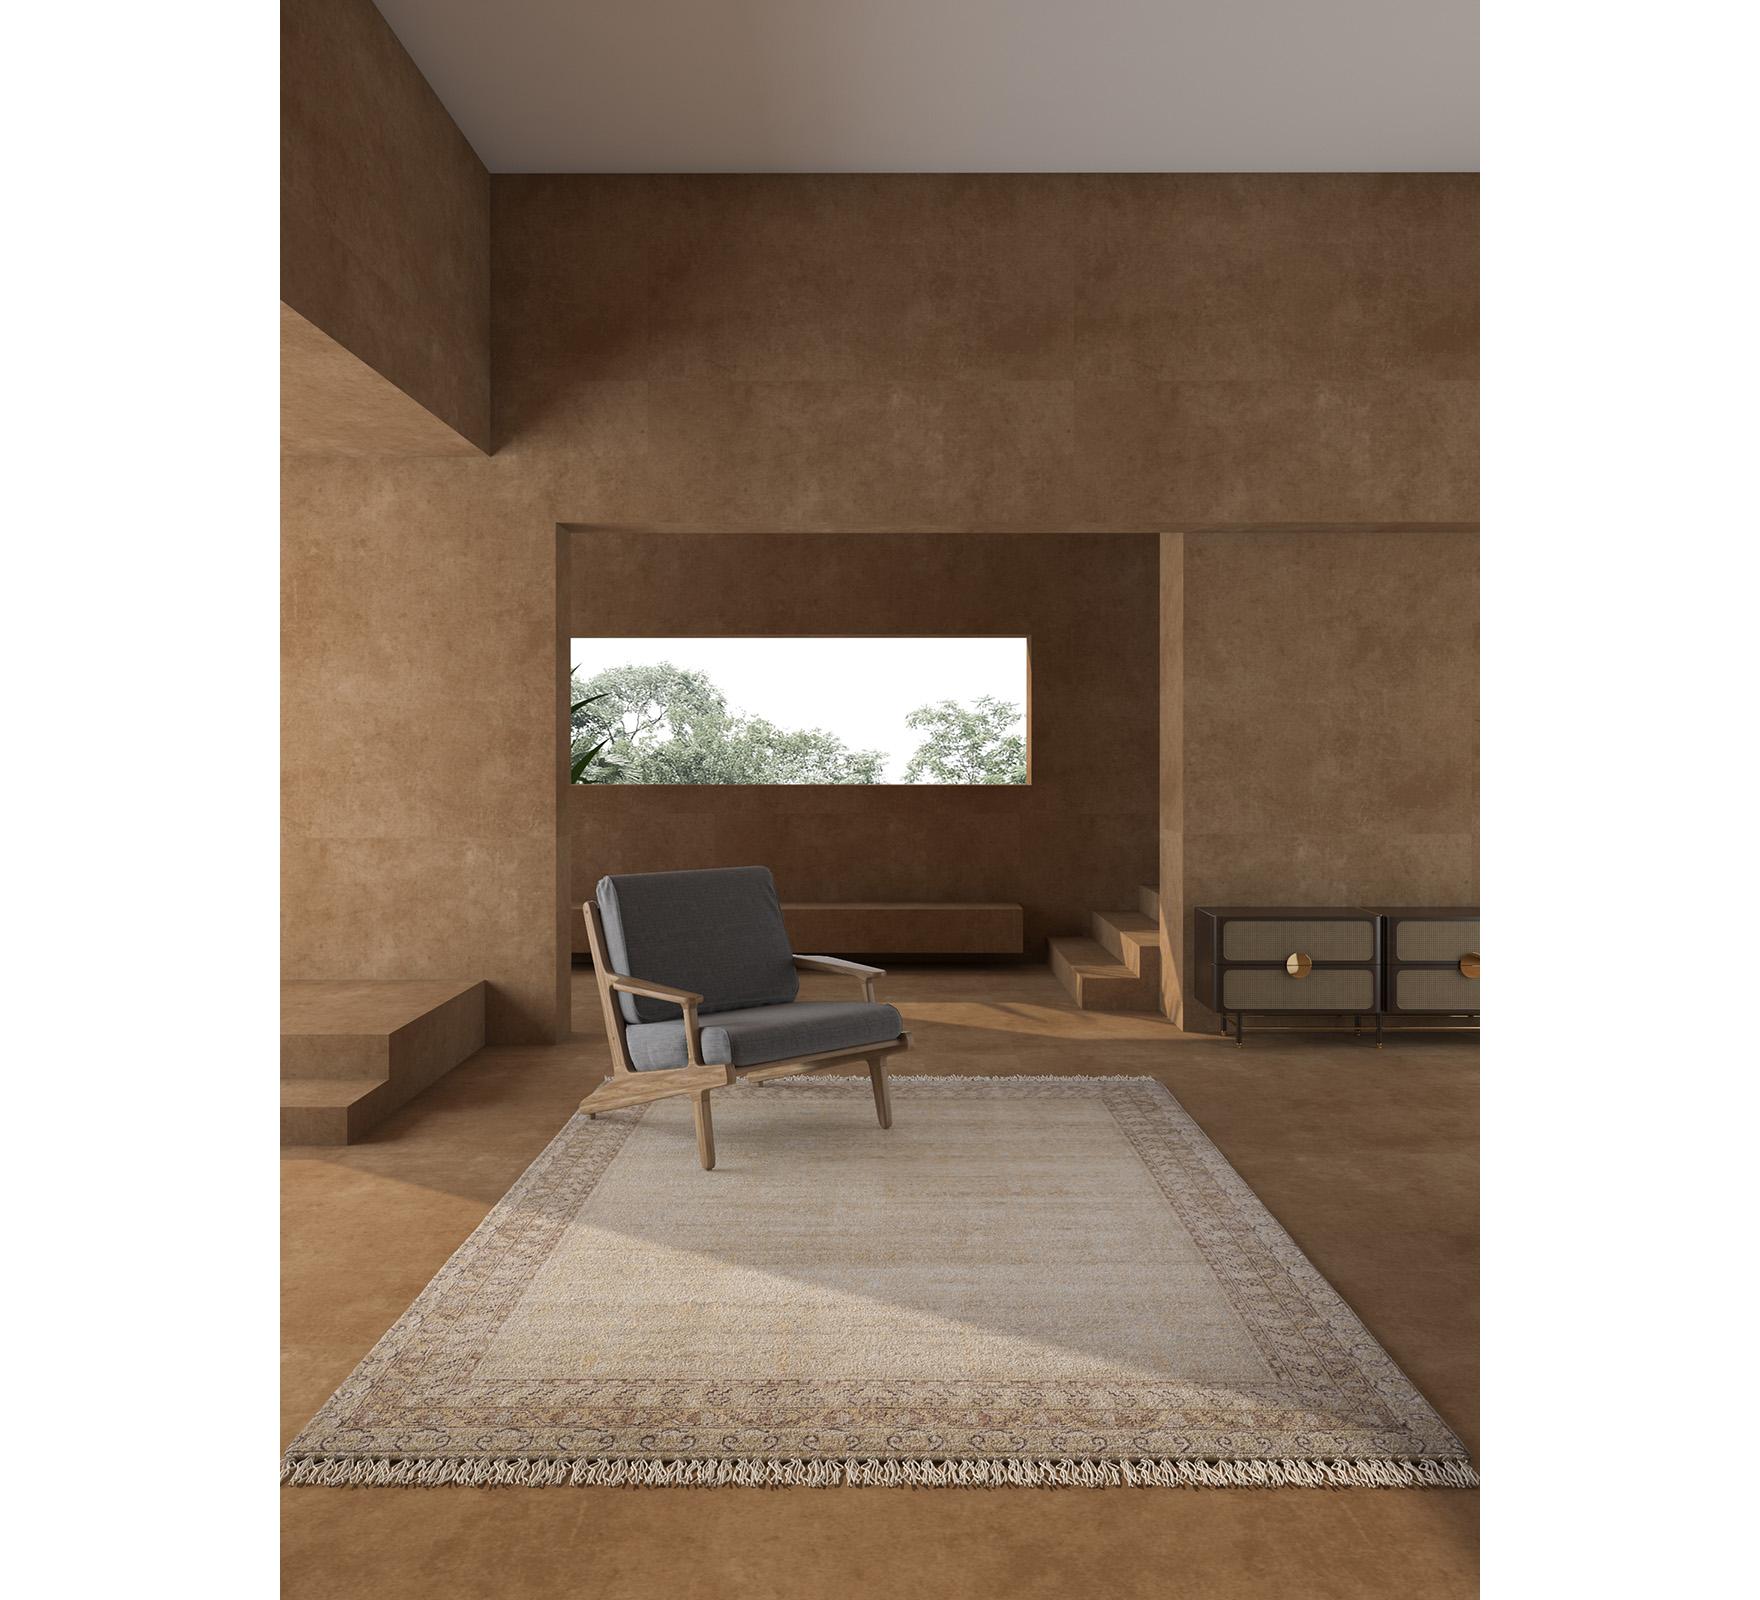 Explore the transformative magic of this hand-knotted rug that transcends conventional decor. Enveloped in a soothing tone-on-tone palette, it becomes an instant mood lifter for any space. Infusing warmth and comfort into your floors, this modern